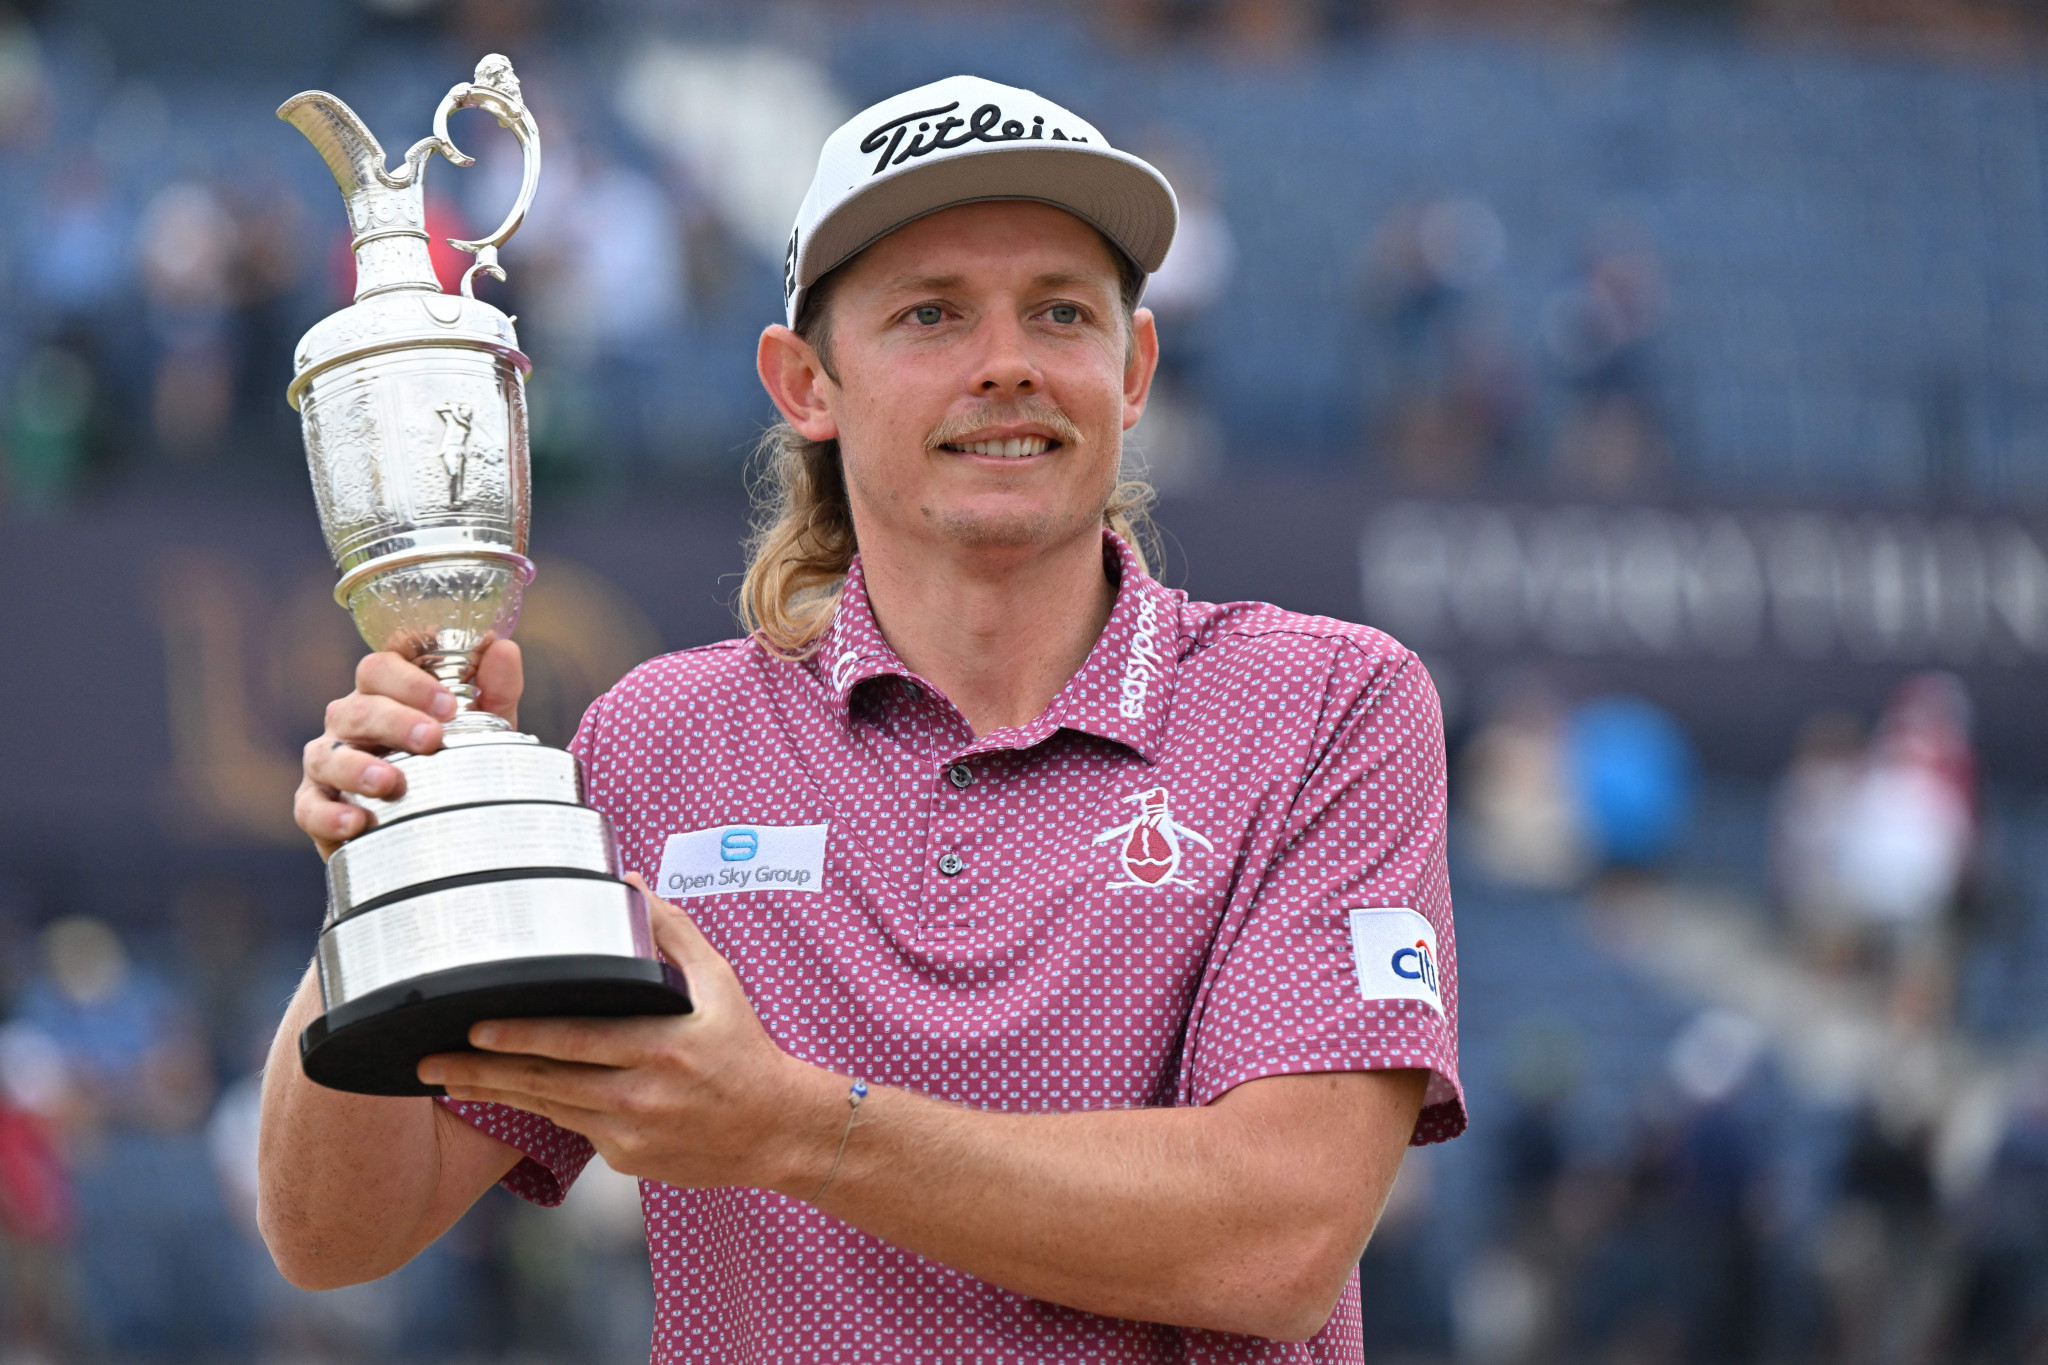 Smith wins 150th Open Championship following remarkable comeback performance